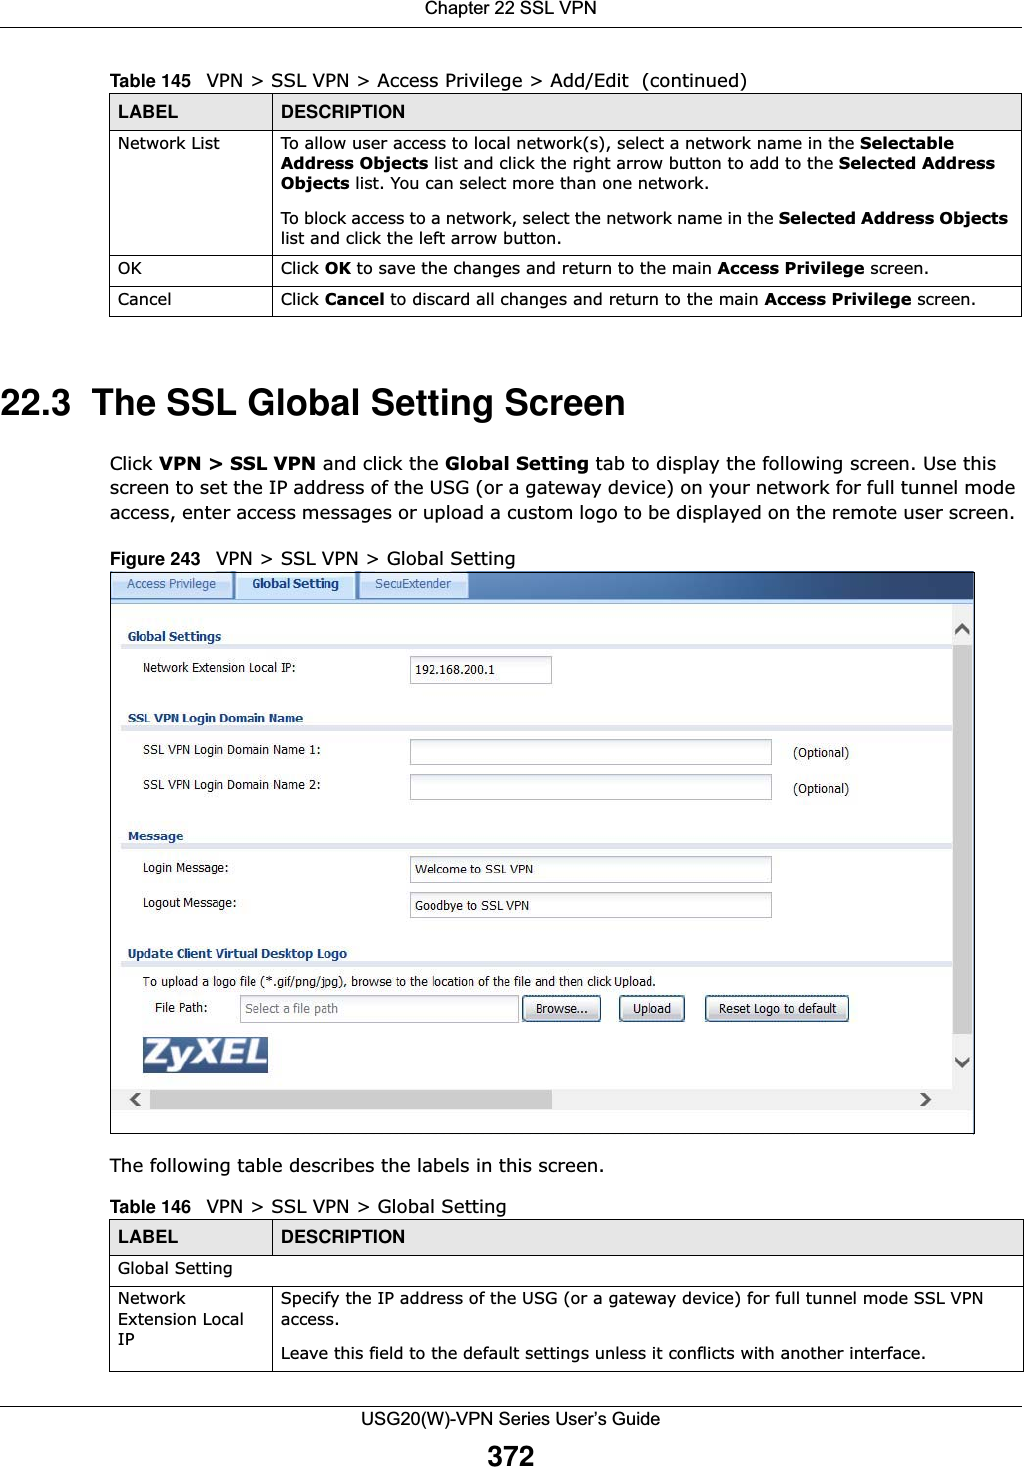 Chapter 22 SSL VPNUSG20(W)-VPN Series User’s Guide37222.3  The SSL Global Setting ScreenClick VPN &gt; SSL VPN and click the Global Setting tab to display the following screen. Use this screen to set the IP address of the USG (or a gateway device) on your network for full tunnel mode access, enter access messages or upload a custom logo to be displayed on the remote user screen. Figure 243   VPN &gt; SSL VPN &gt; Global Setting The following table describes the labels in this screen. Network List To allow user access to local network(s), select a network name in the Selectable Address Objects list and click the right arrow button to add to the Selected Address Objects list. You can select more than one network. To block access to a network, select the network name in the Selected Address Objects list and click the left arrow button. OK Click OK to save the changes and return to the main Access Privilege screen. Cancel Click Cancel to discard all changes and return to the main Access Privilege screen. Table 145   VPN &gt; SSL VPN &gt; Access Privilege &gt; Add/Edit  (continued)LABEL DESCRIPTIONTable 146   VPN &gt; SSL VPN &gt; Global SettingLABEL DESCRIPTIONGlobal SettingNetwork Extension Local IPSpecify the IP address of the USG (or a gateway device) for full tunnel mode SSL VPN access. Leave this field to the default settings unless it conflicts with another interface. 